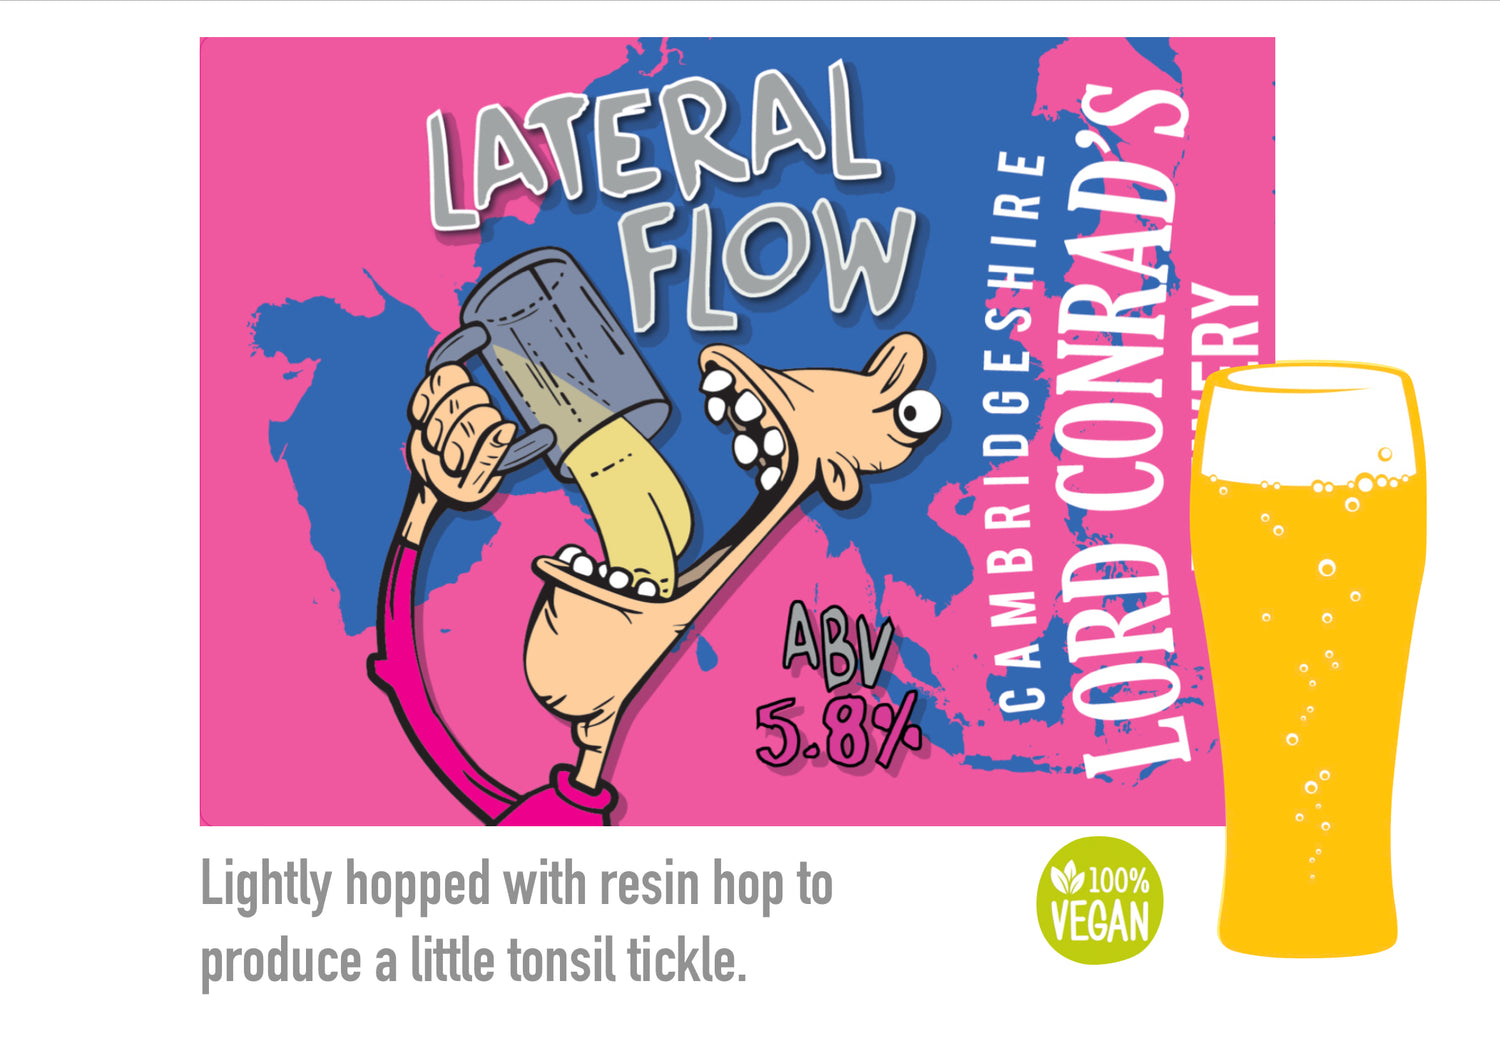 Lateral Flow 5.8% suitable for vegans 